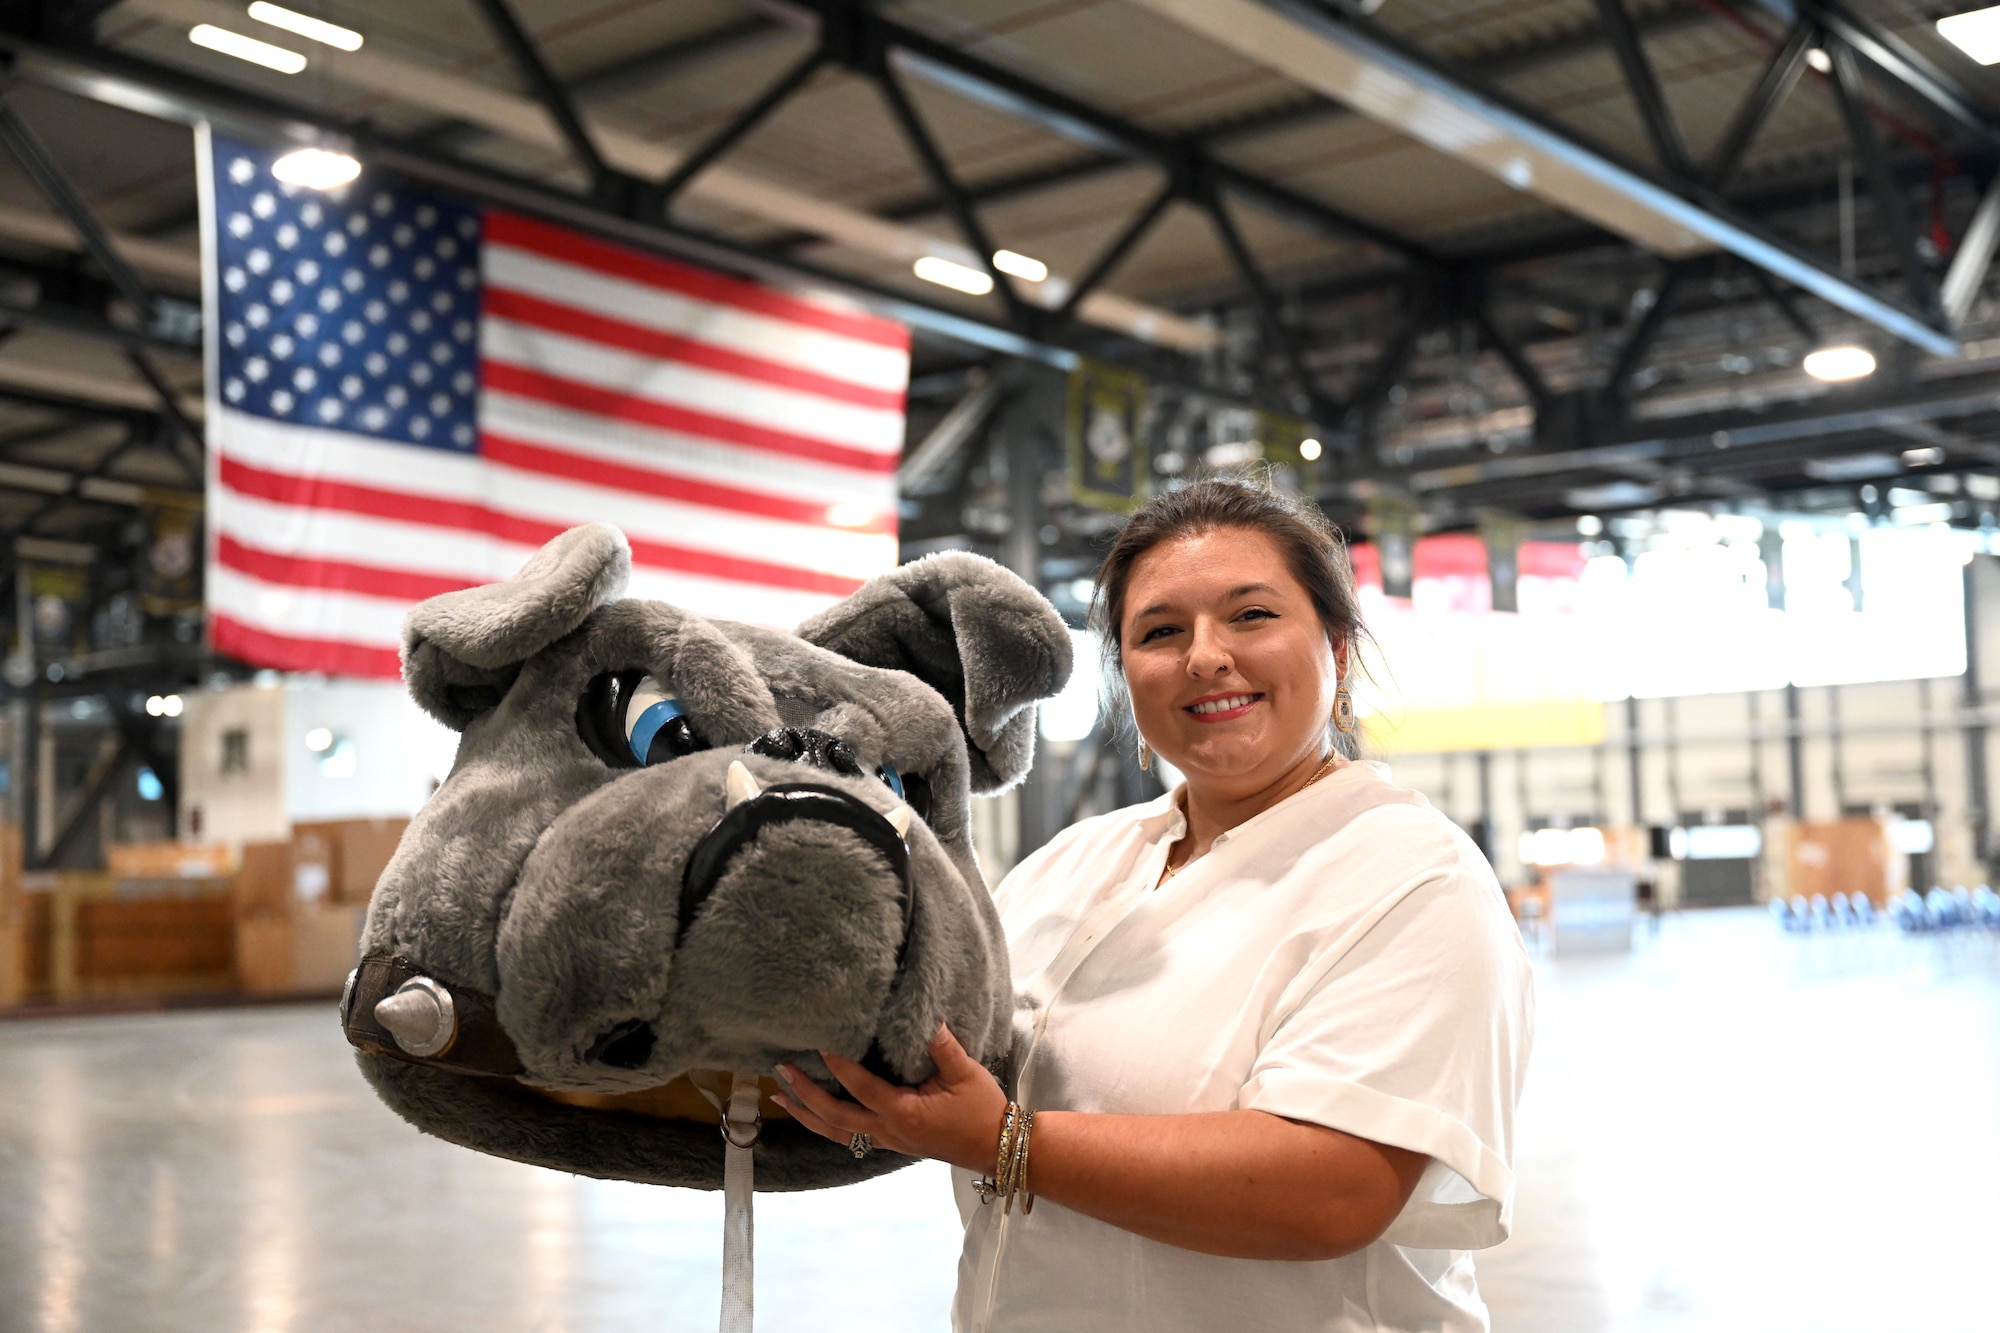 Chelsie Moncecchi, Key Spouse, poses for a photo with the 721st Aerial Port Squadron Port Dawg mascot on Ramstein Air Base, Germany, Aug. 5, 2022. Moncecchi won U.S. Air Force Key Spouse of the Year for her service as a 721st APS Key Spouse from January to December 2021 and was with the unit's program for four years.